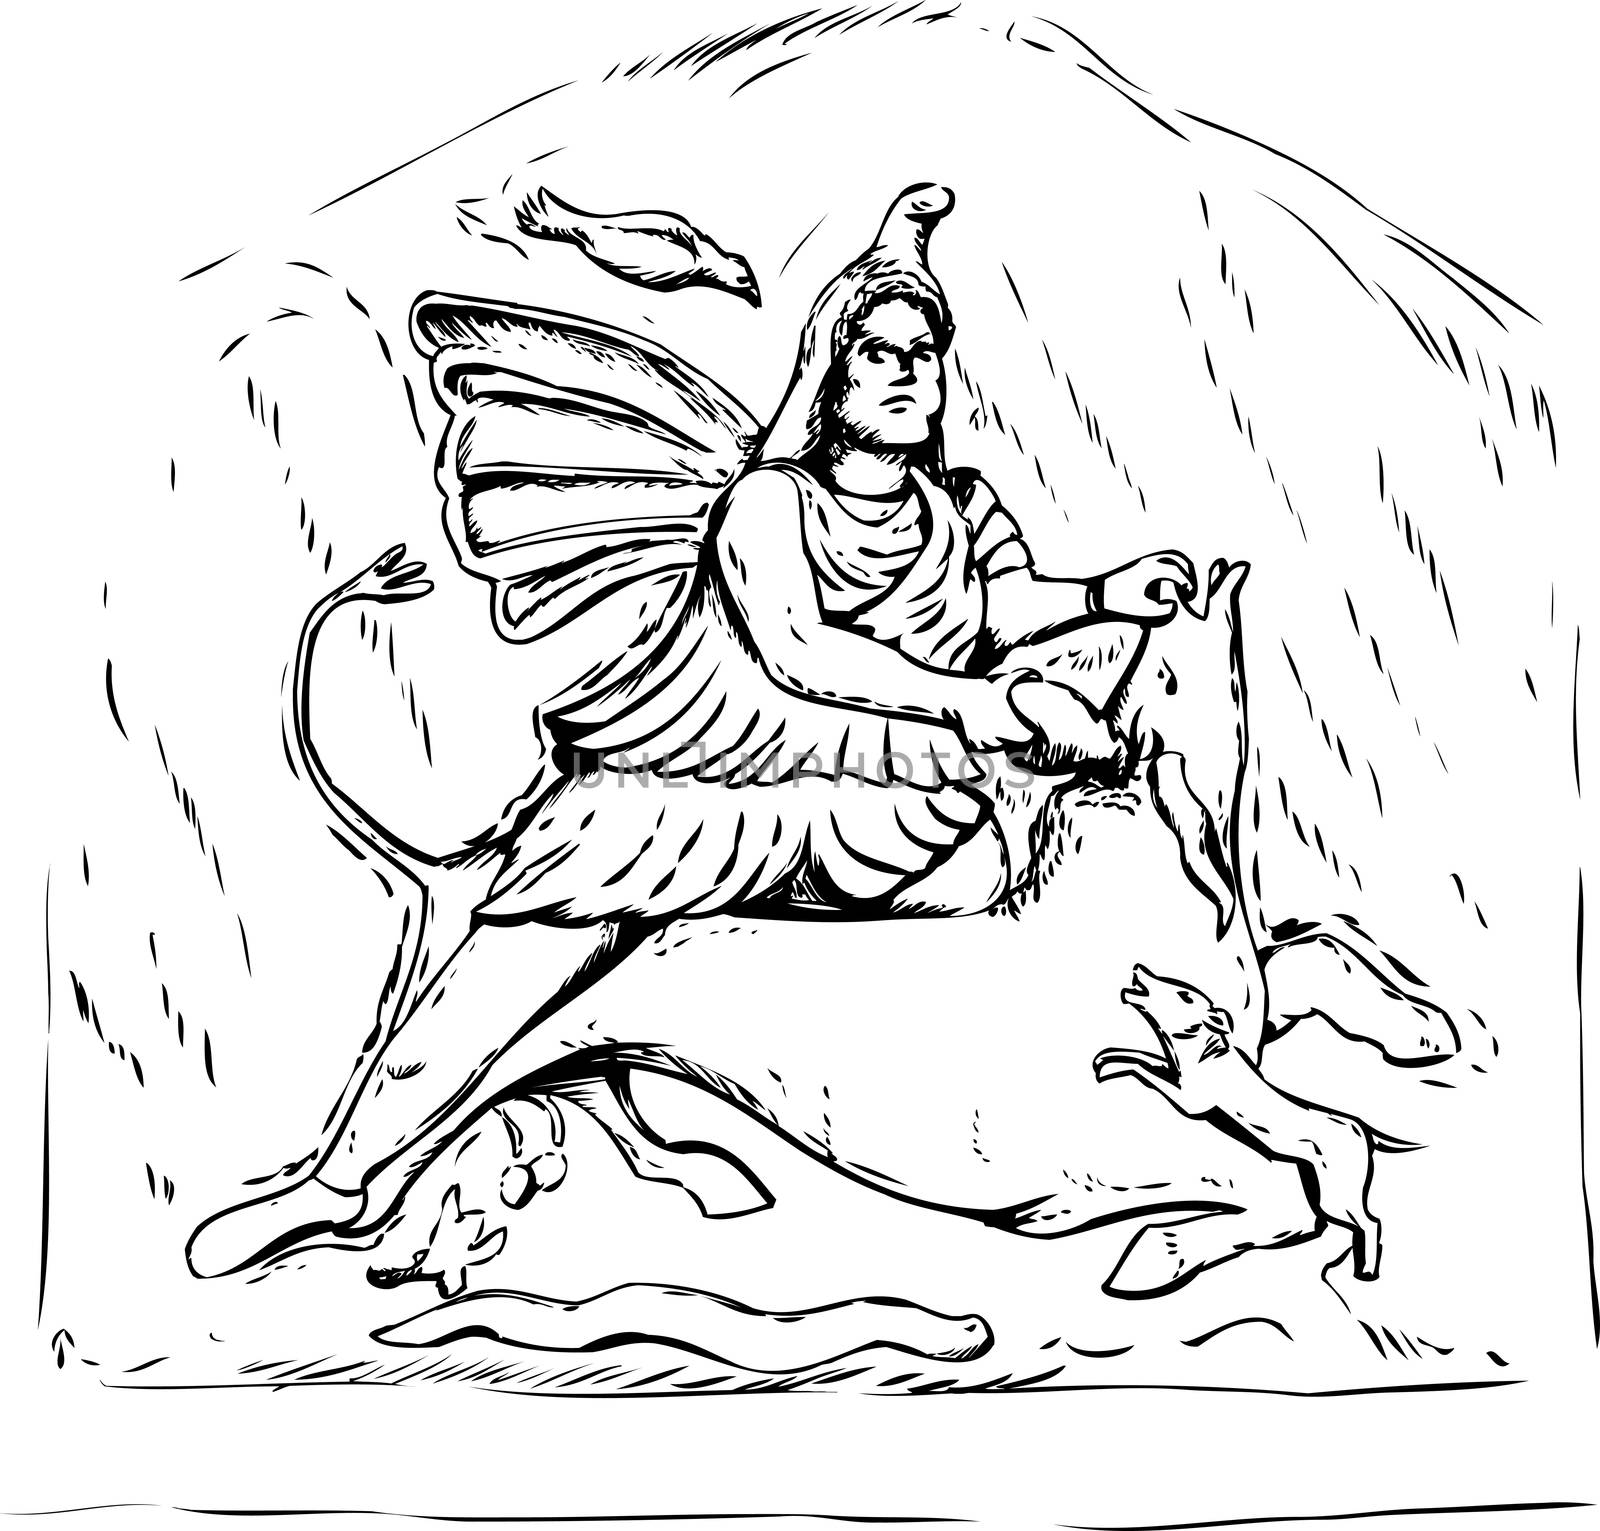 Outlined forensic reconstruction of Persian god Mithras slaying of a black bull from 4th century stone carving in Jajce, Bosnia